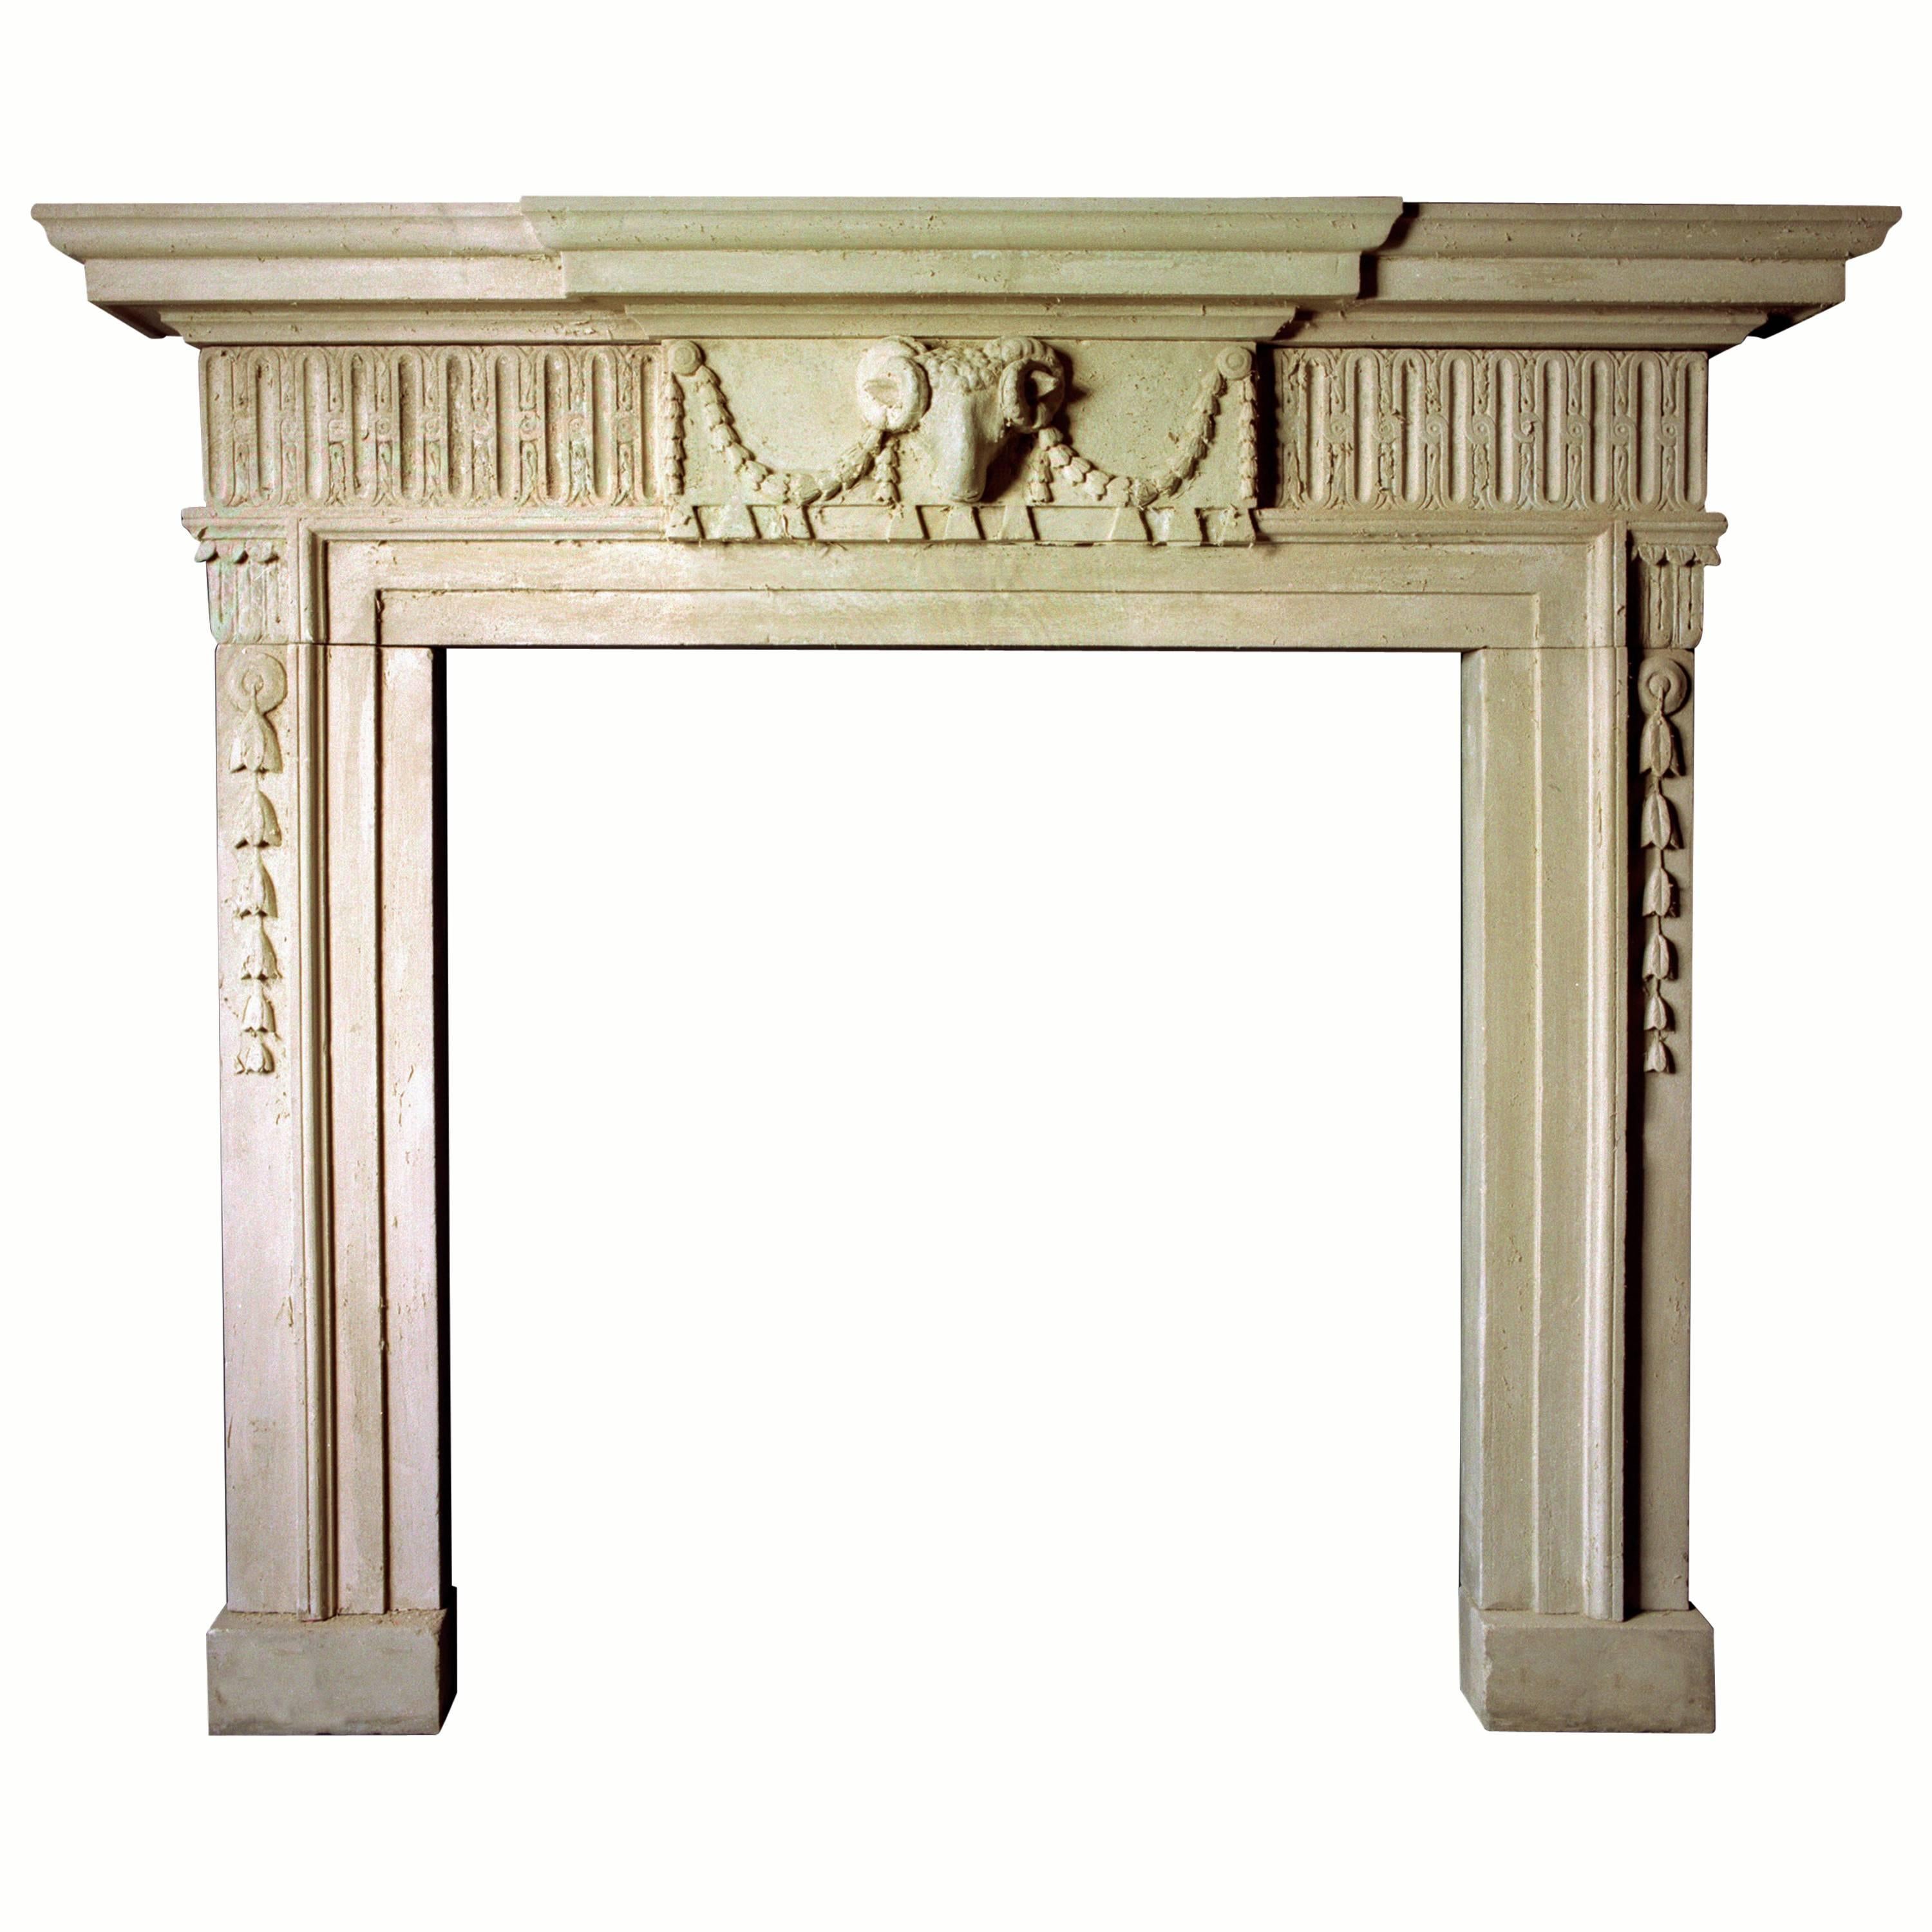 18th Century Reproduction Mantel with Ram's Mask Carved in Portland Limestone